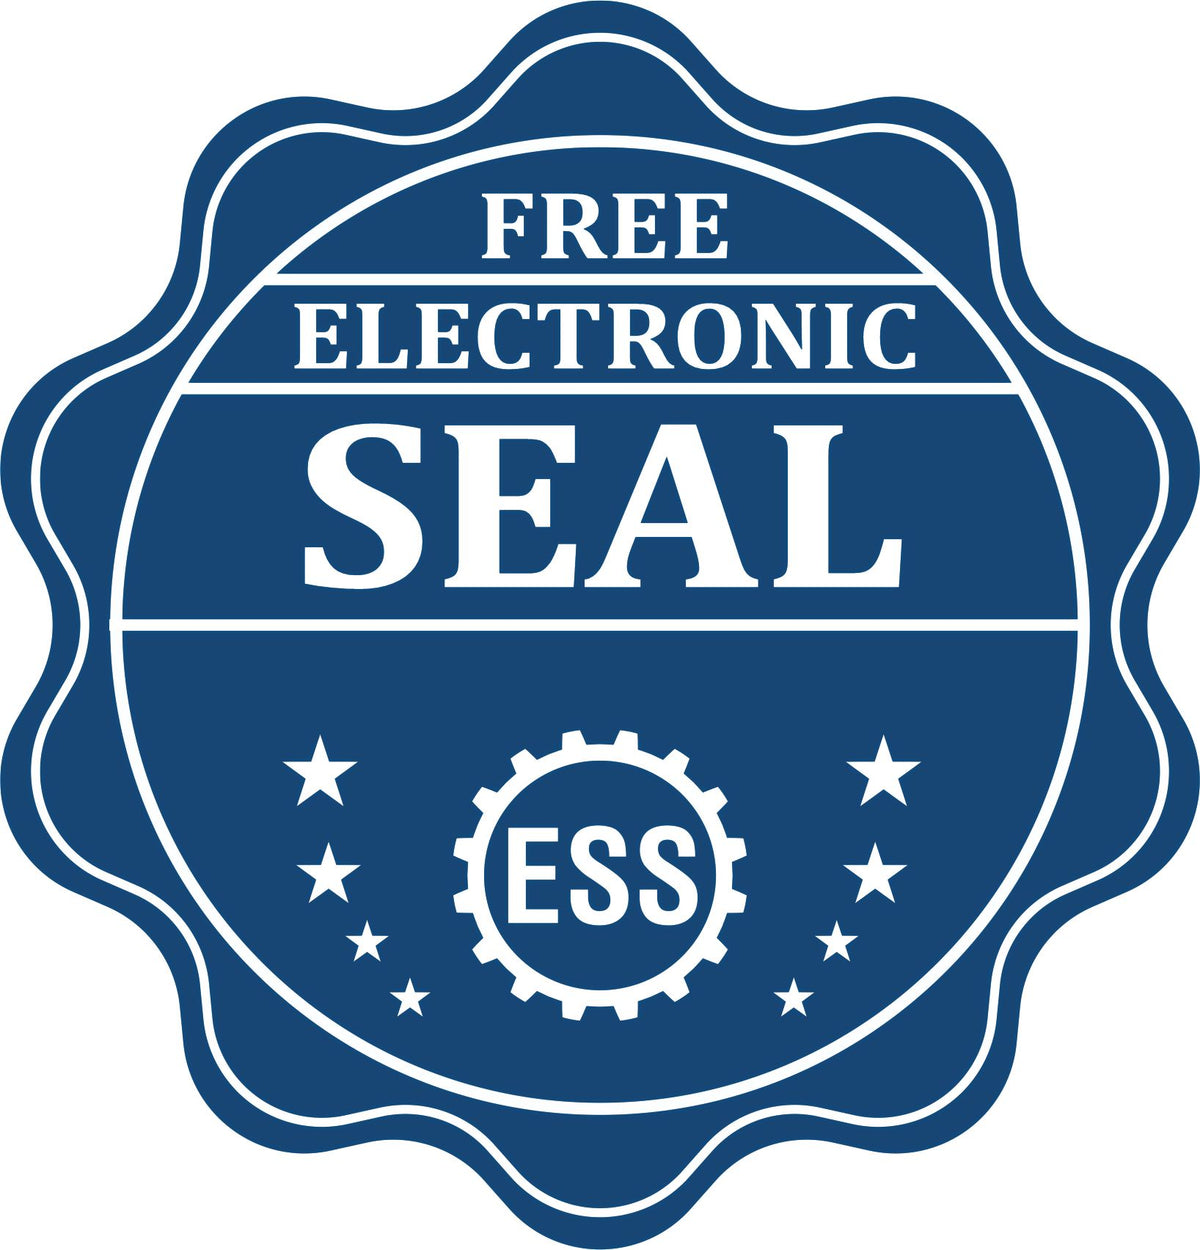 A badge showing a free electronic seal for the Soft Pocket Nebraska Landscape Architect Embosser with stars and the ESS gear on the emblem.